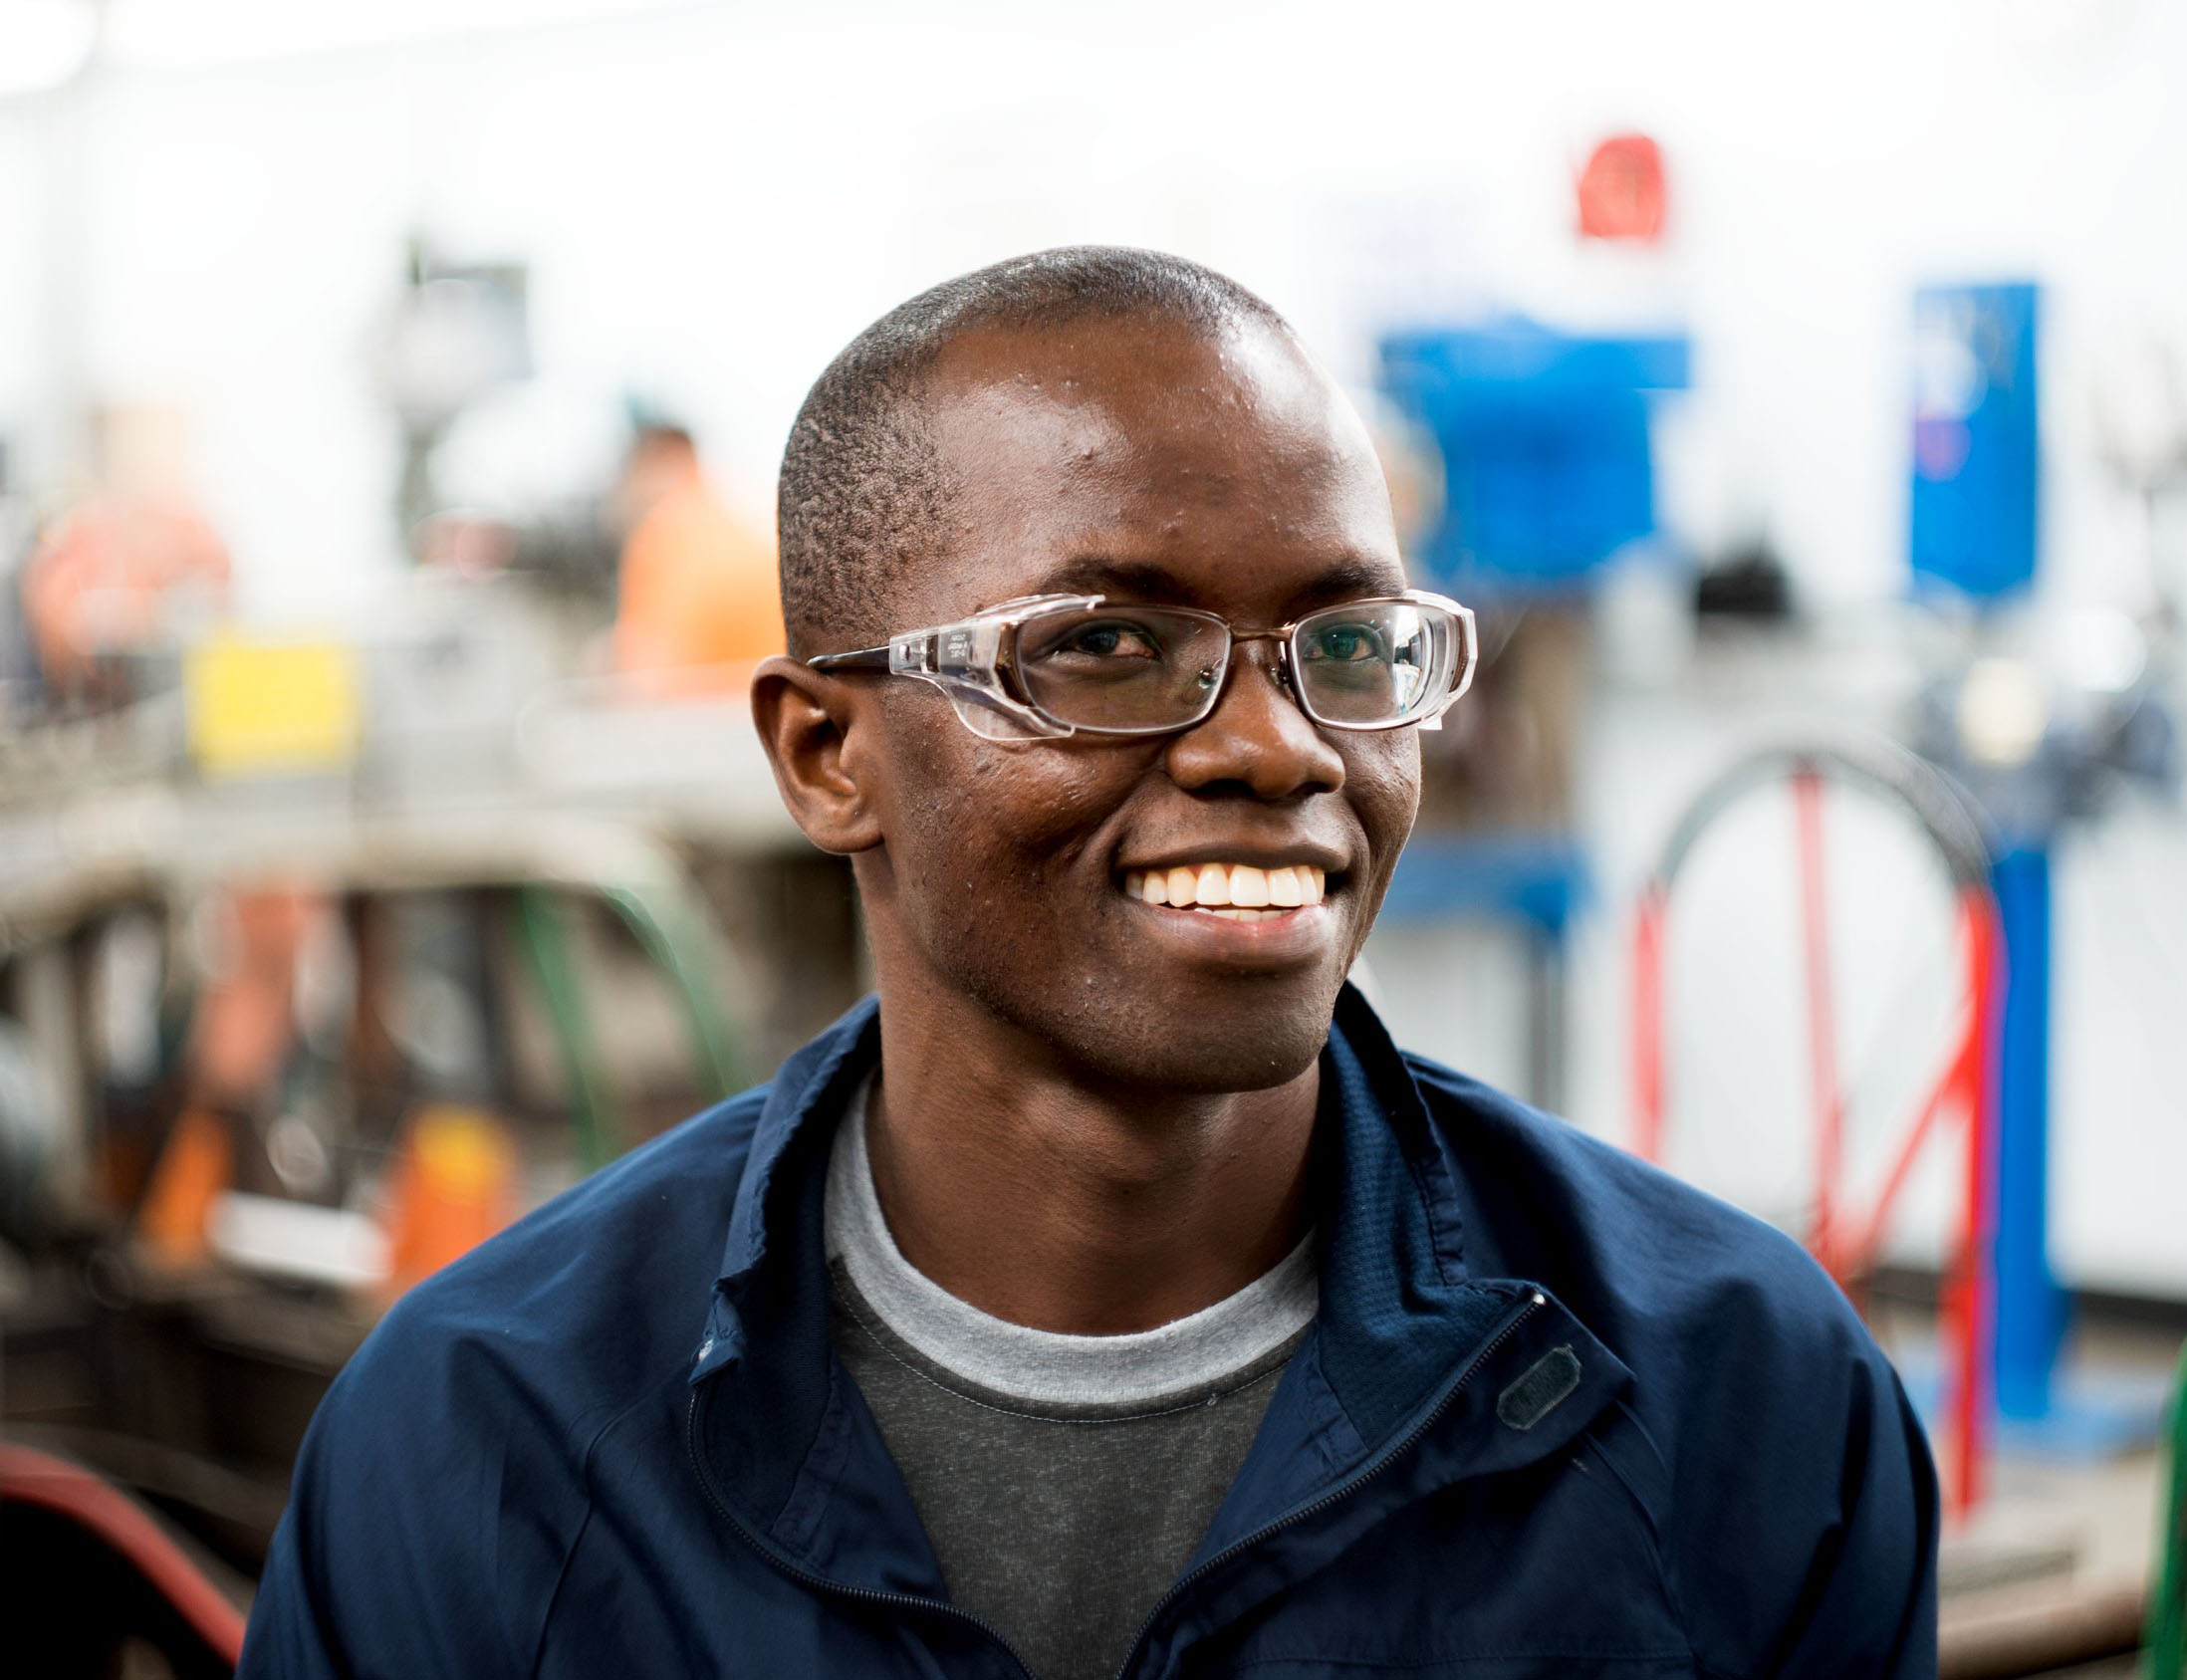 Young man smiles while wearing safety glasses. Manufacturing equipment blurred in the background.